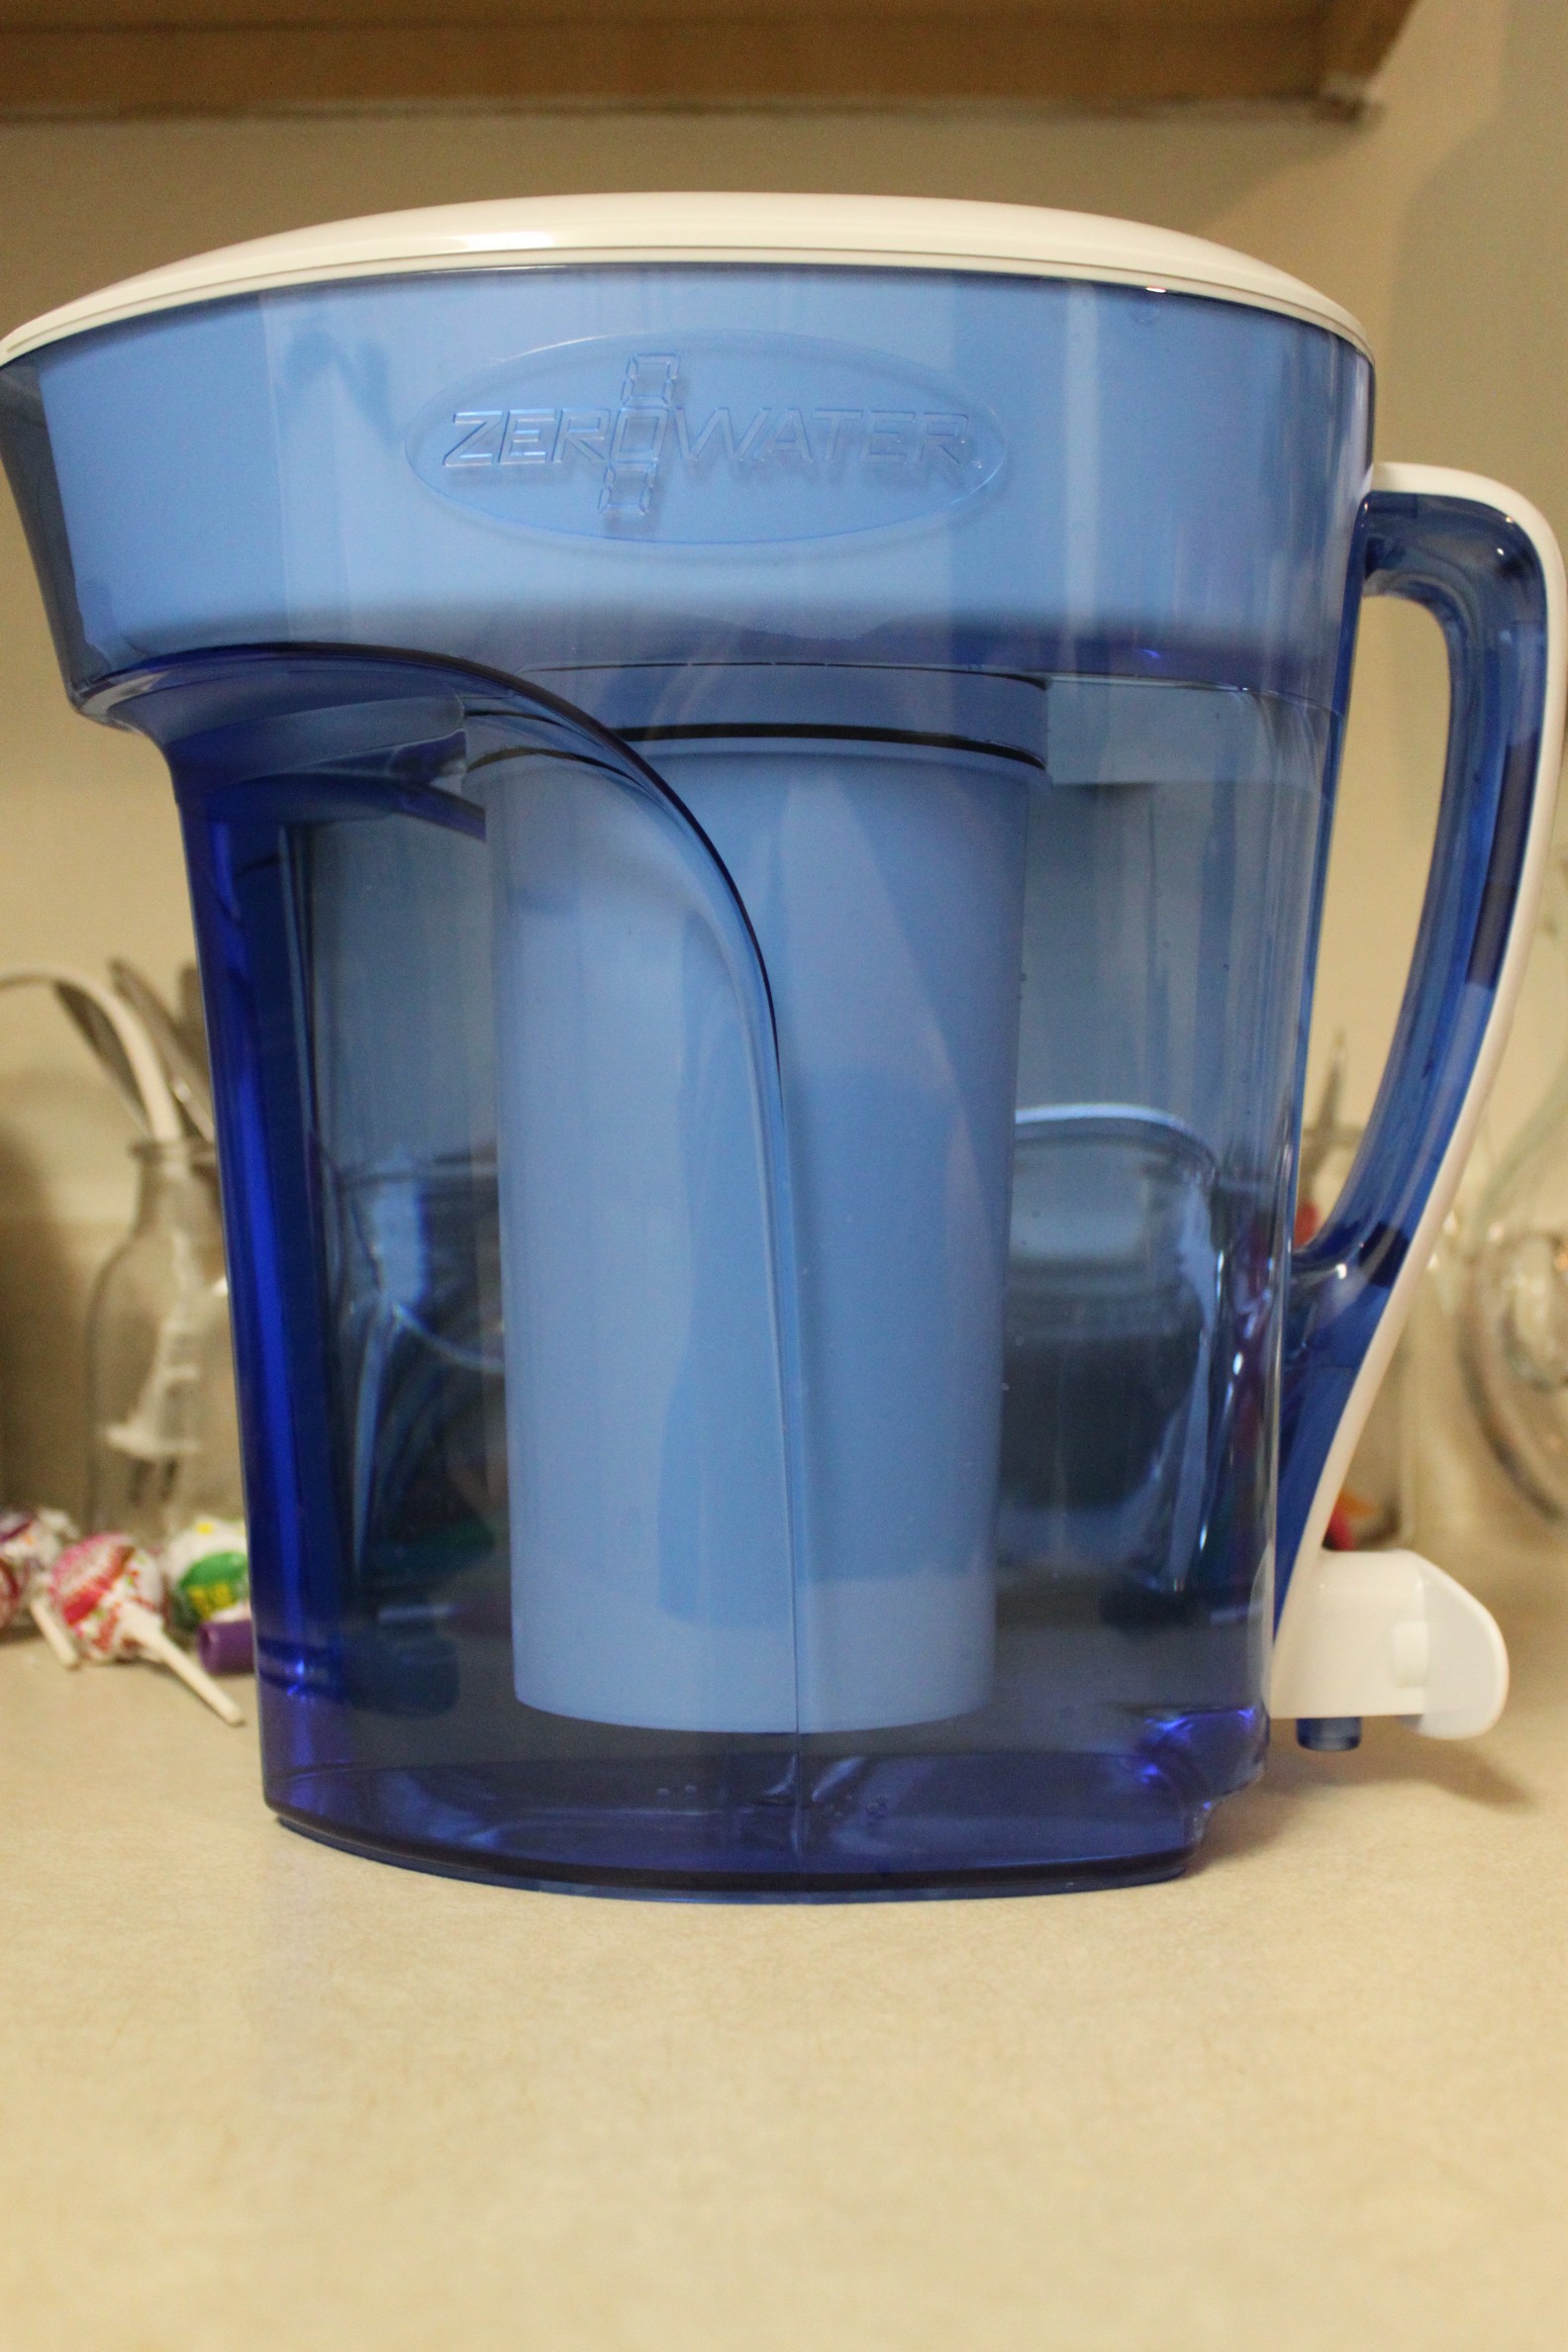 Zero Water Pitcher Reviews (Must Read) – The Goodfor Company